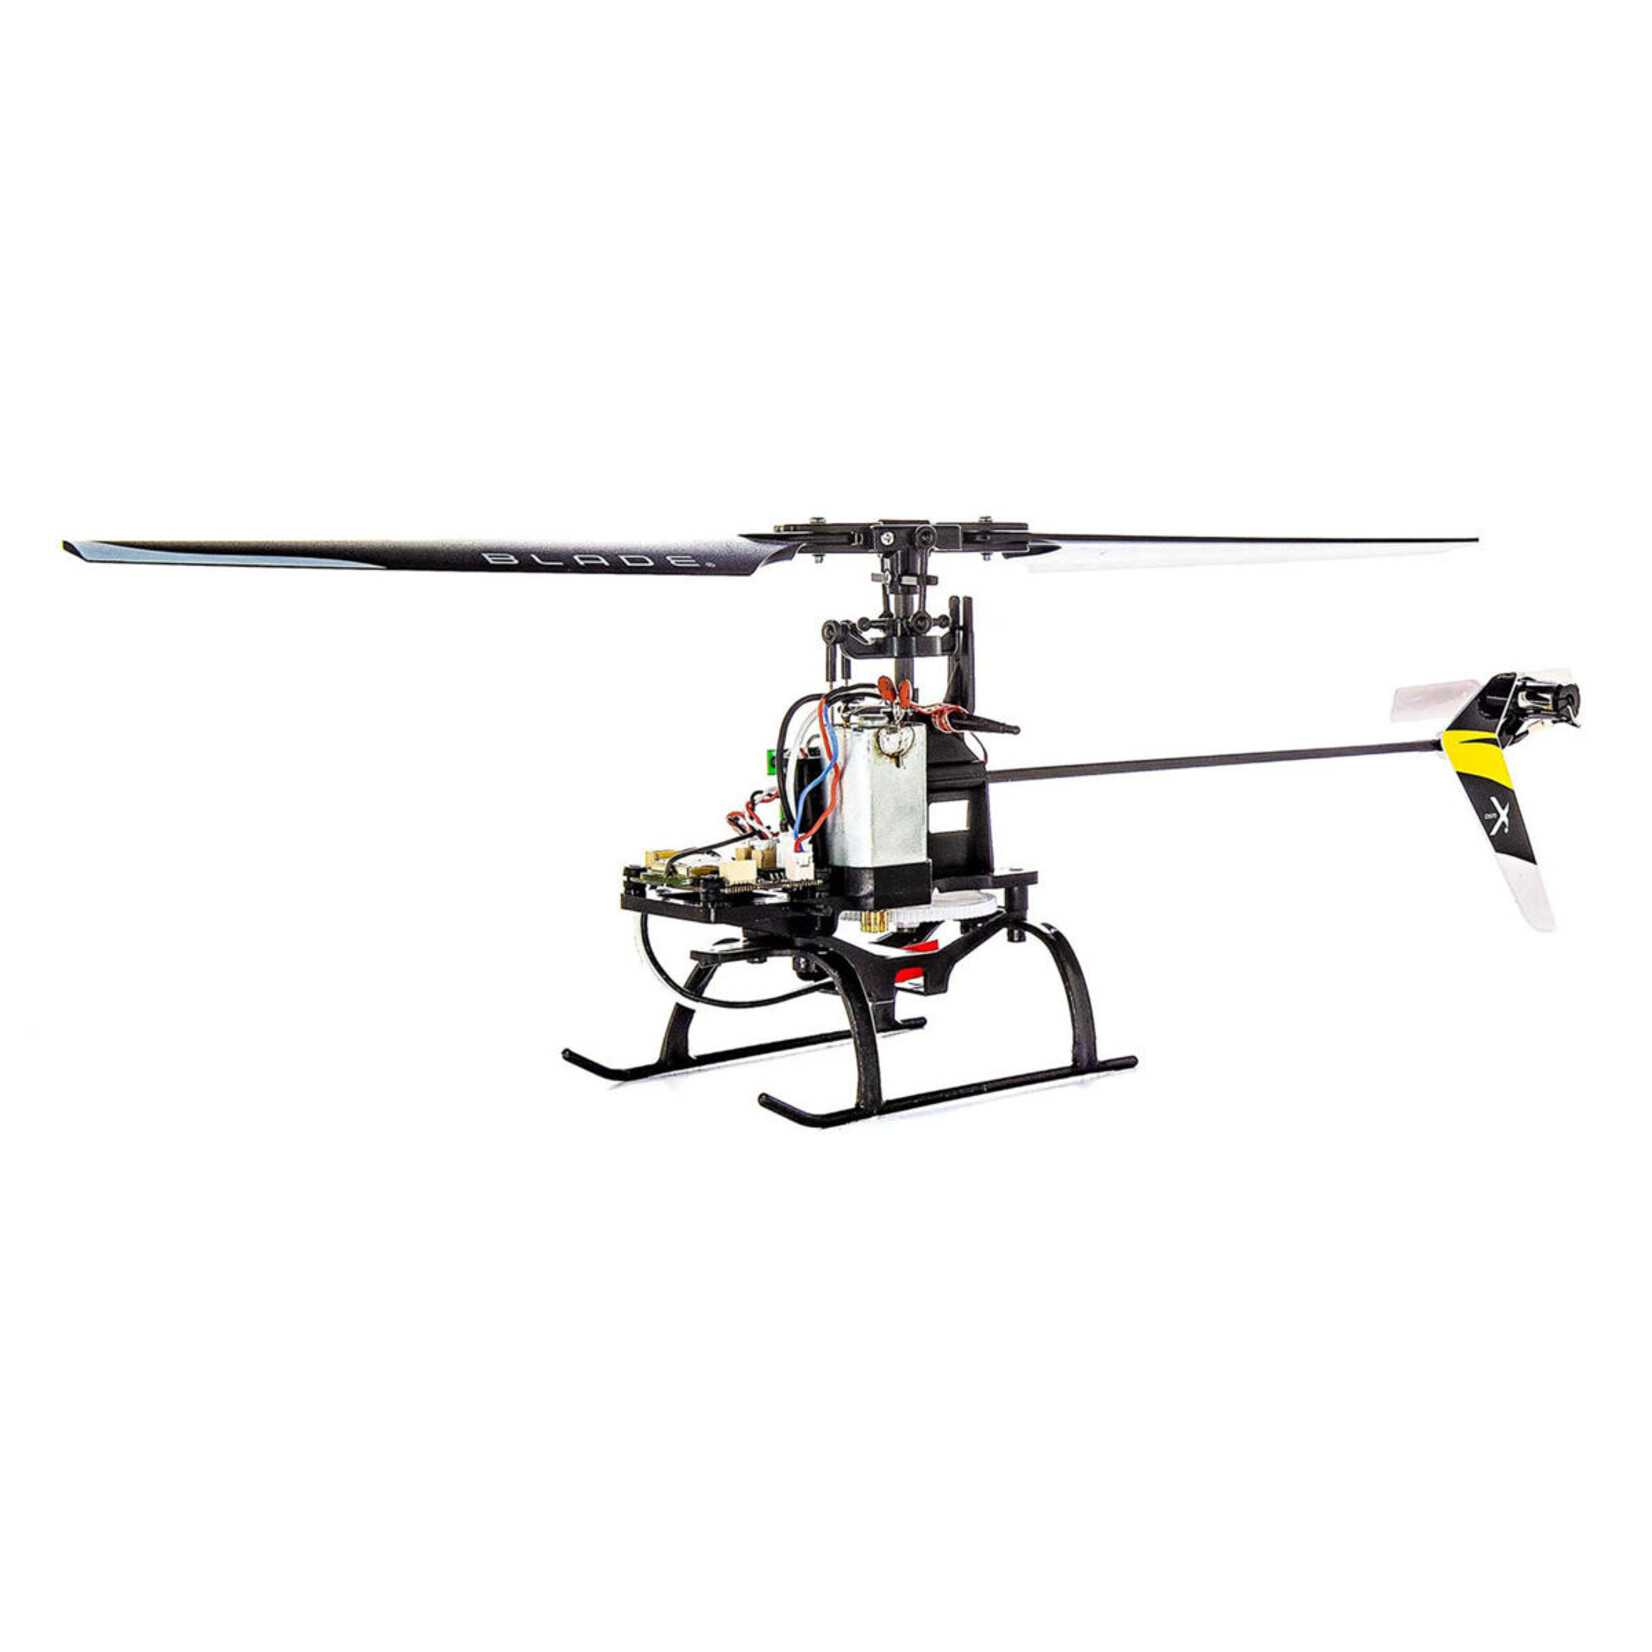 Blade Blade 120 S2 Fixed Pitch Trainer RTF Electric Micro Helicopter w/2.4GHz Radio & SAFE Technology #BLH1100